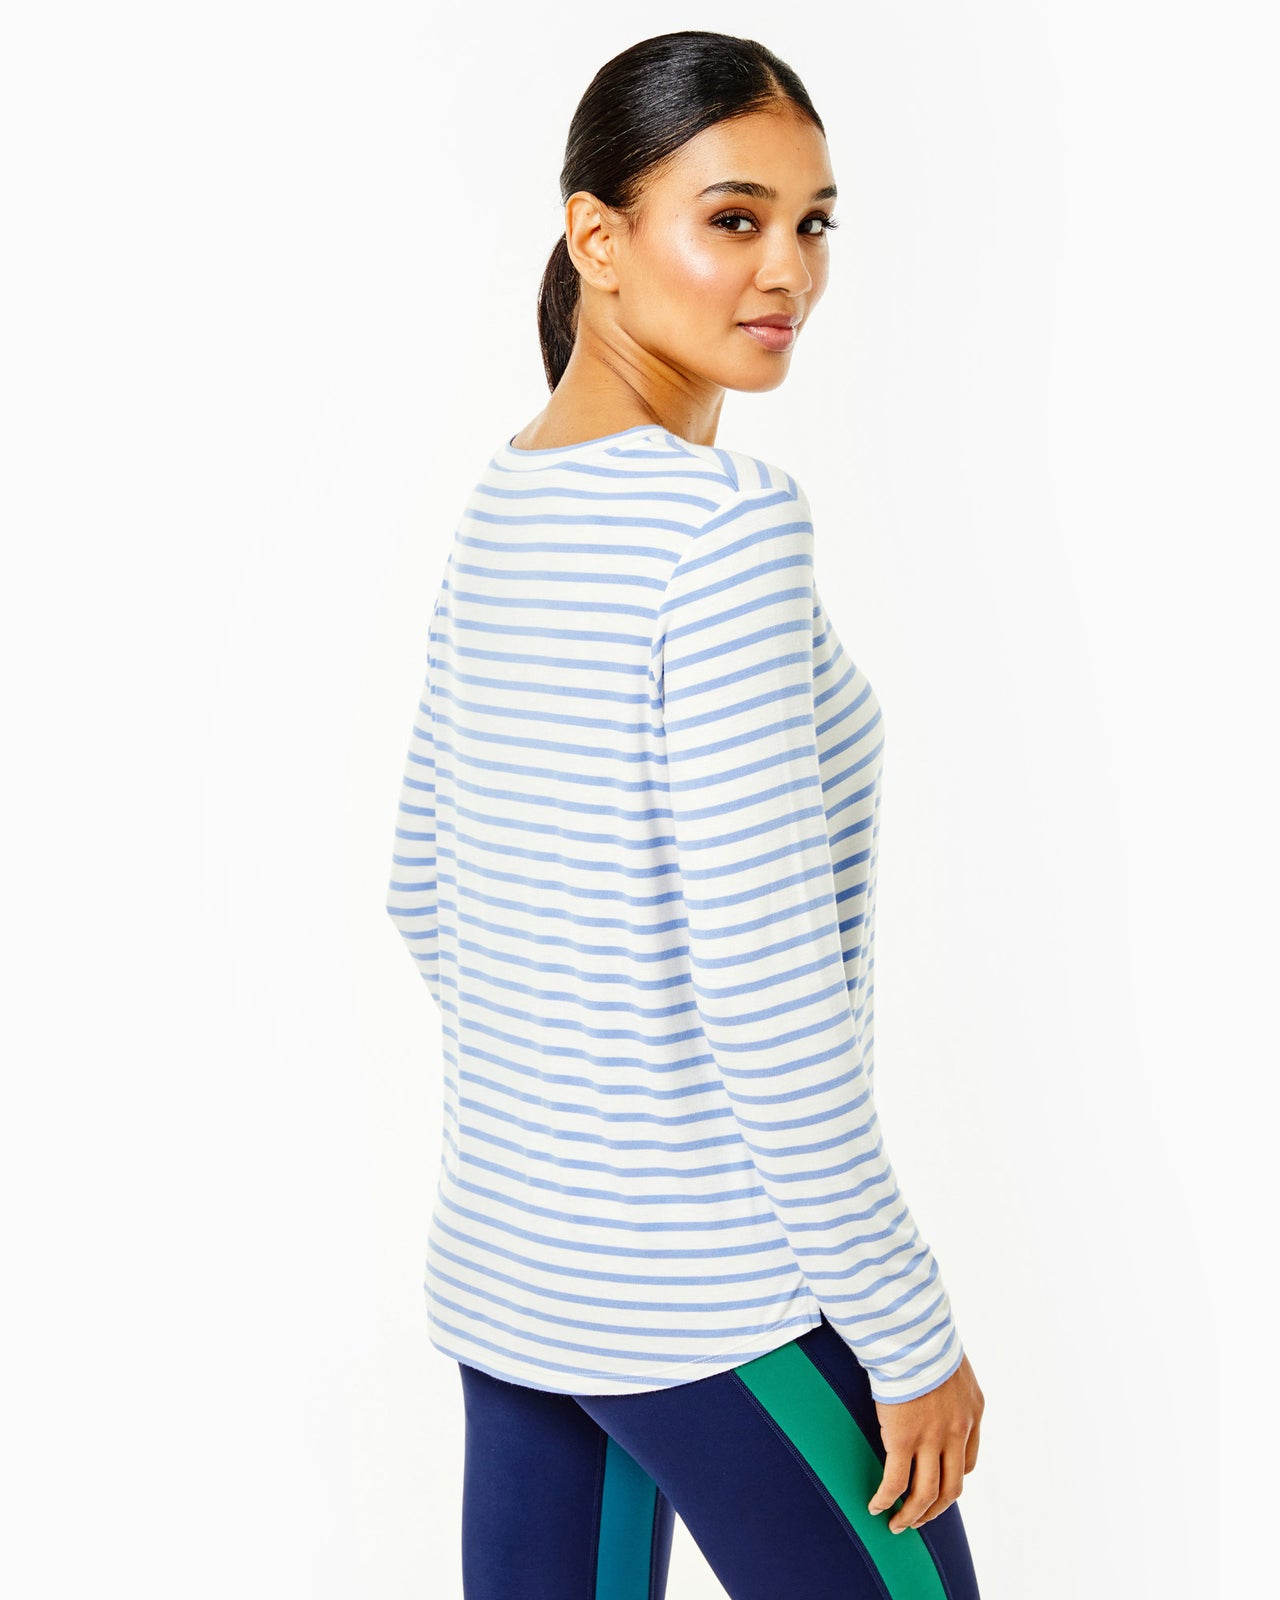 The Everyday Long Sleeve